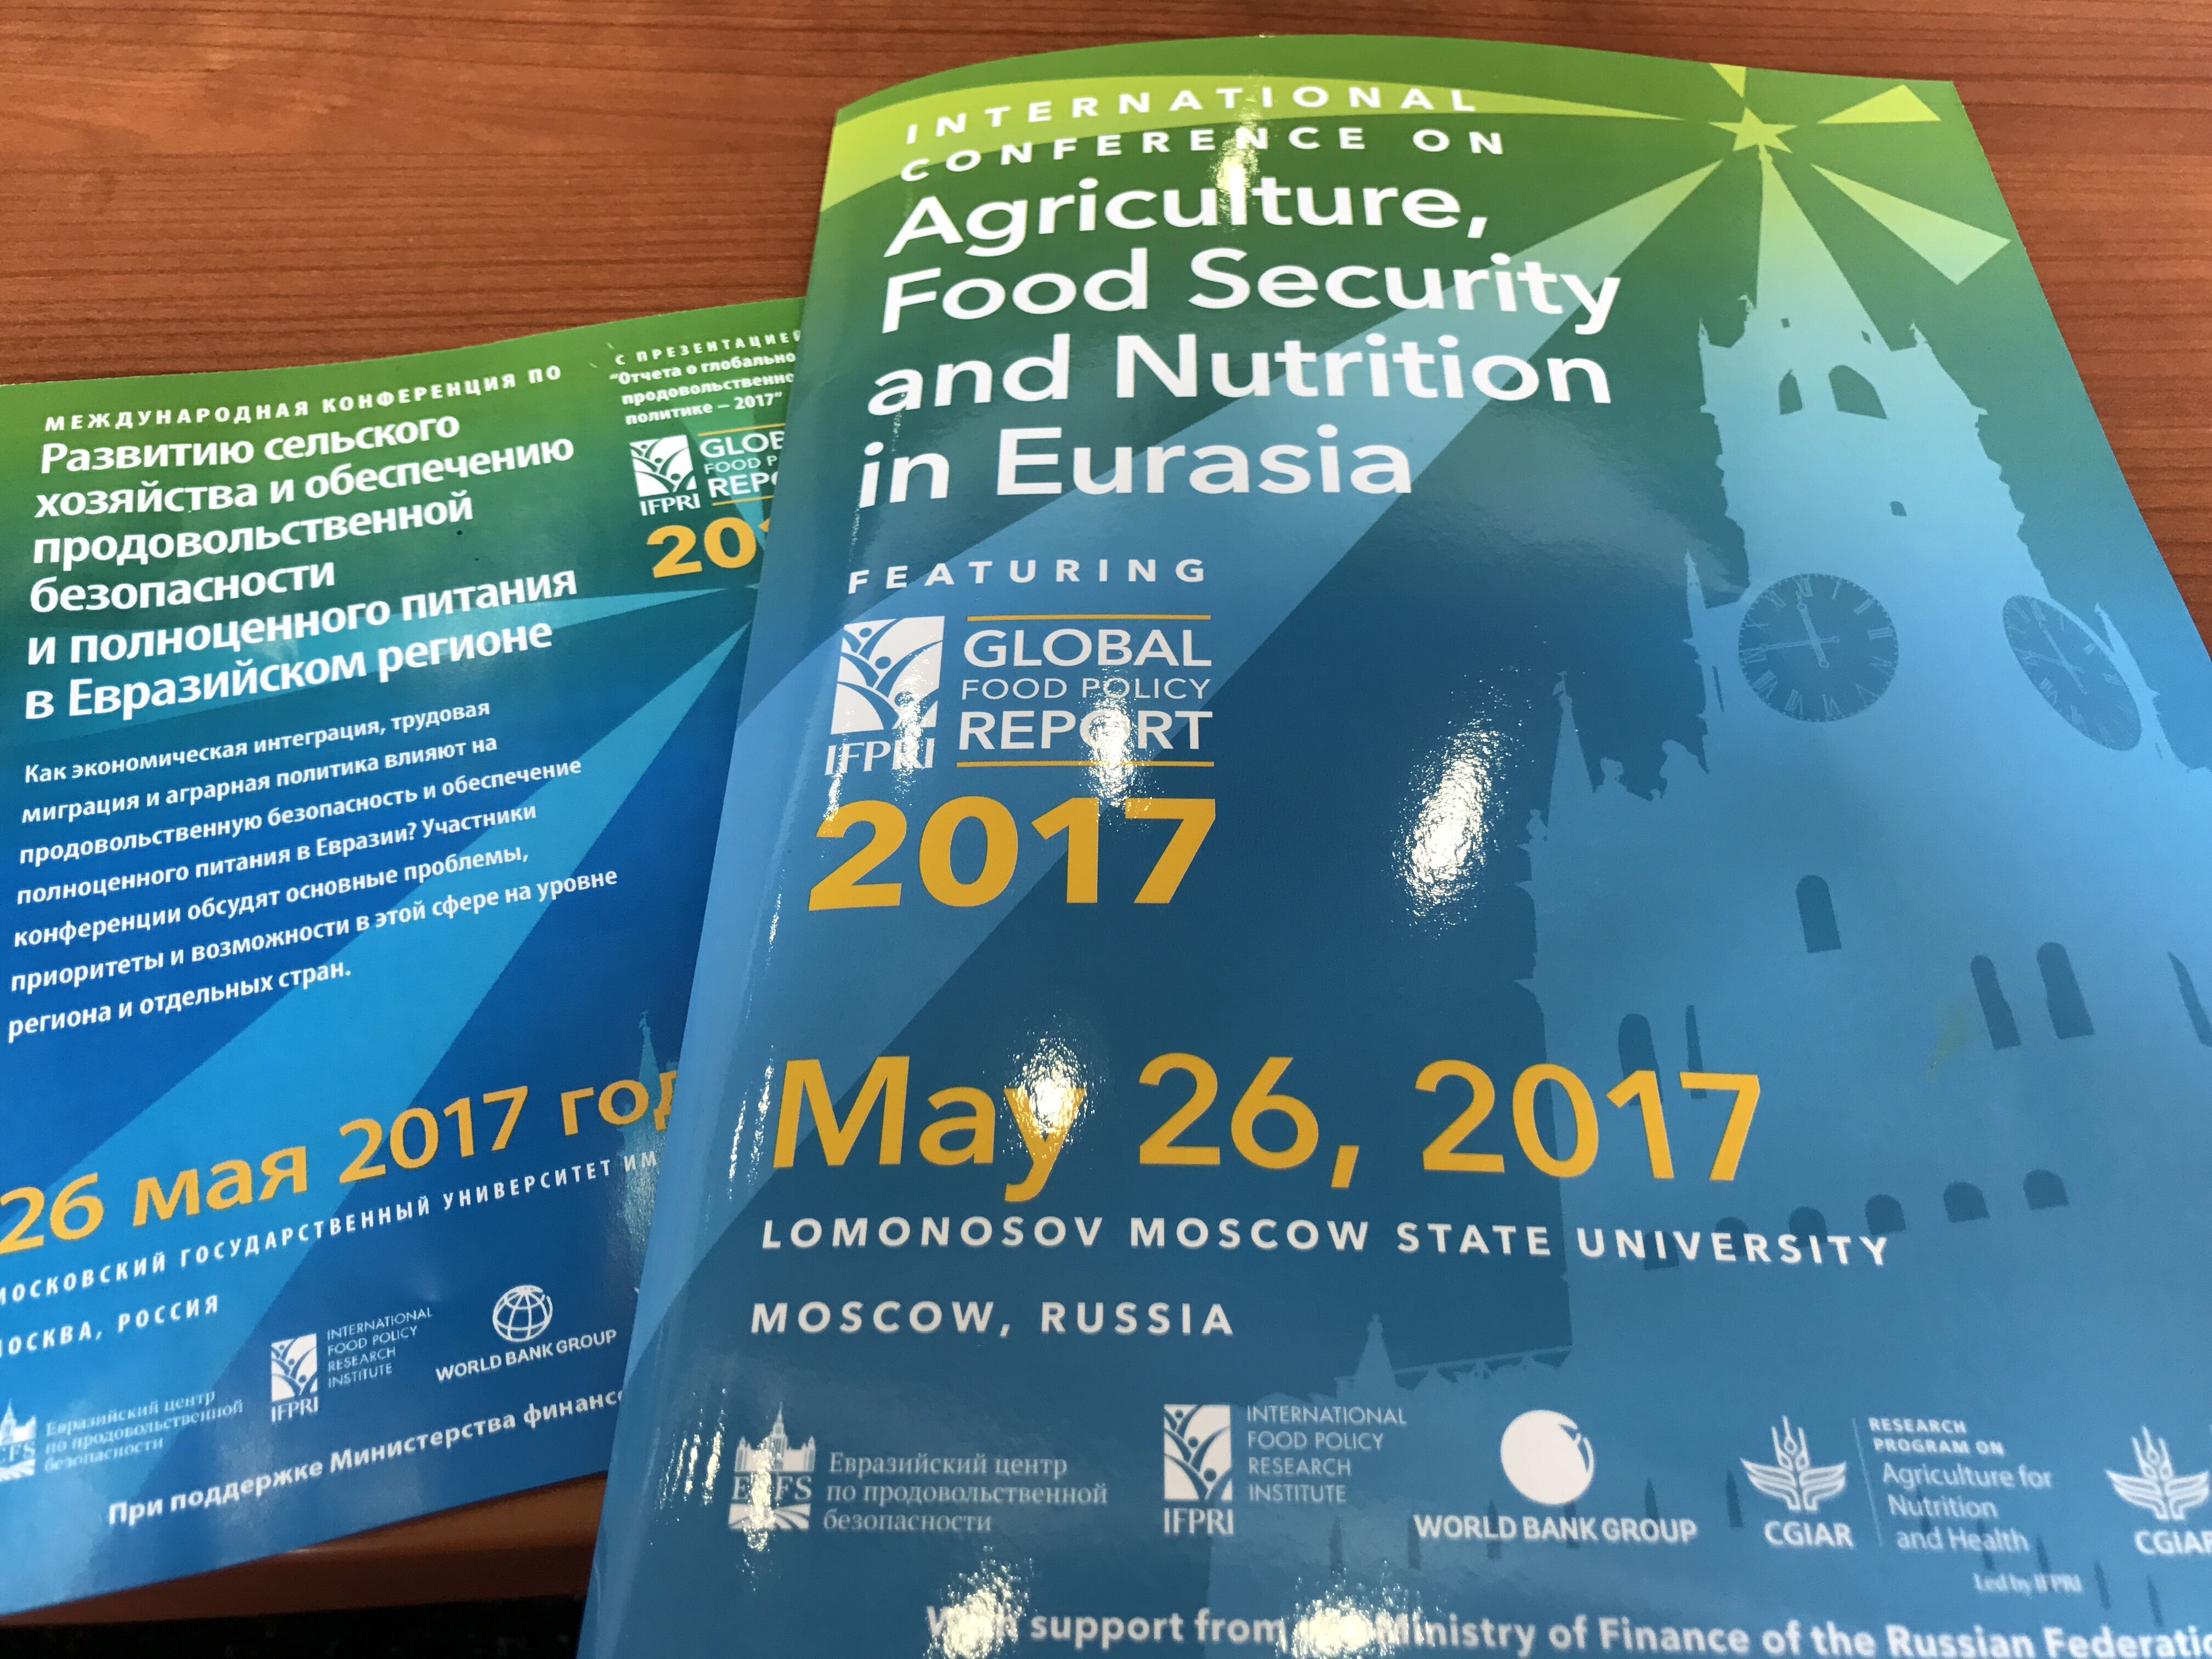 Research and data for food security and nutrition: Building food policy research capacity in Eurasia